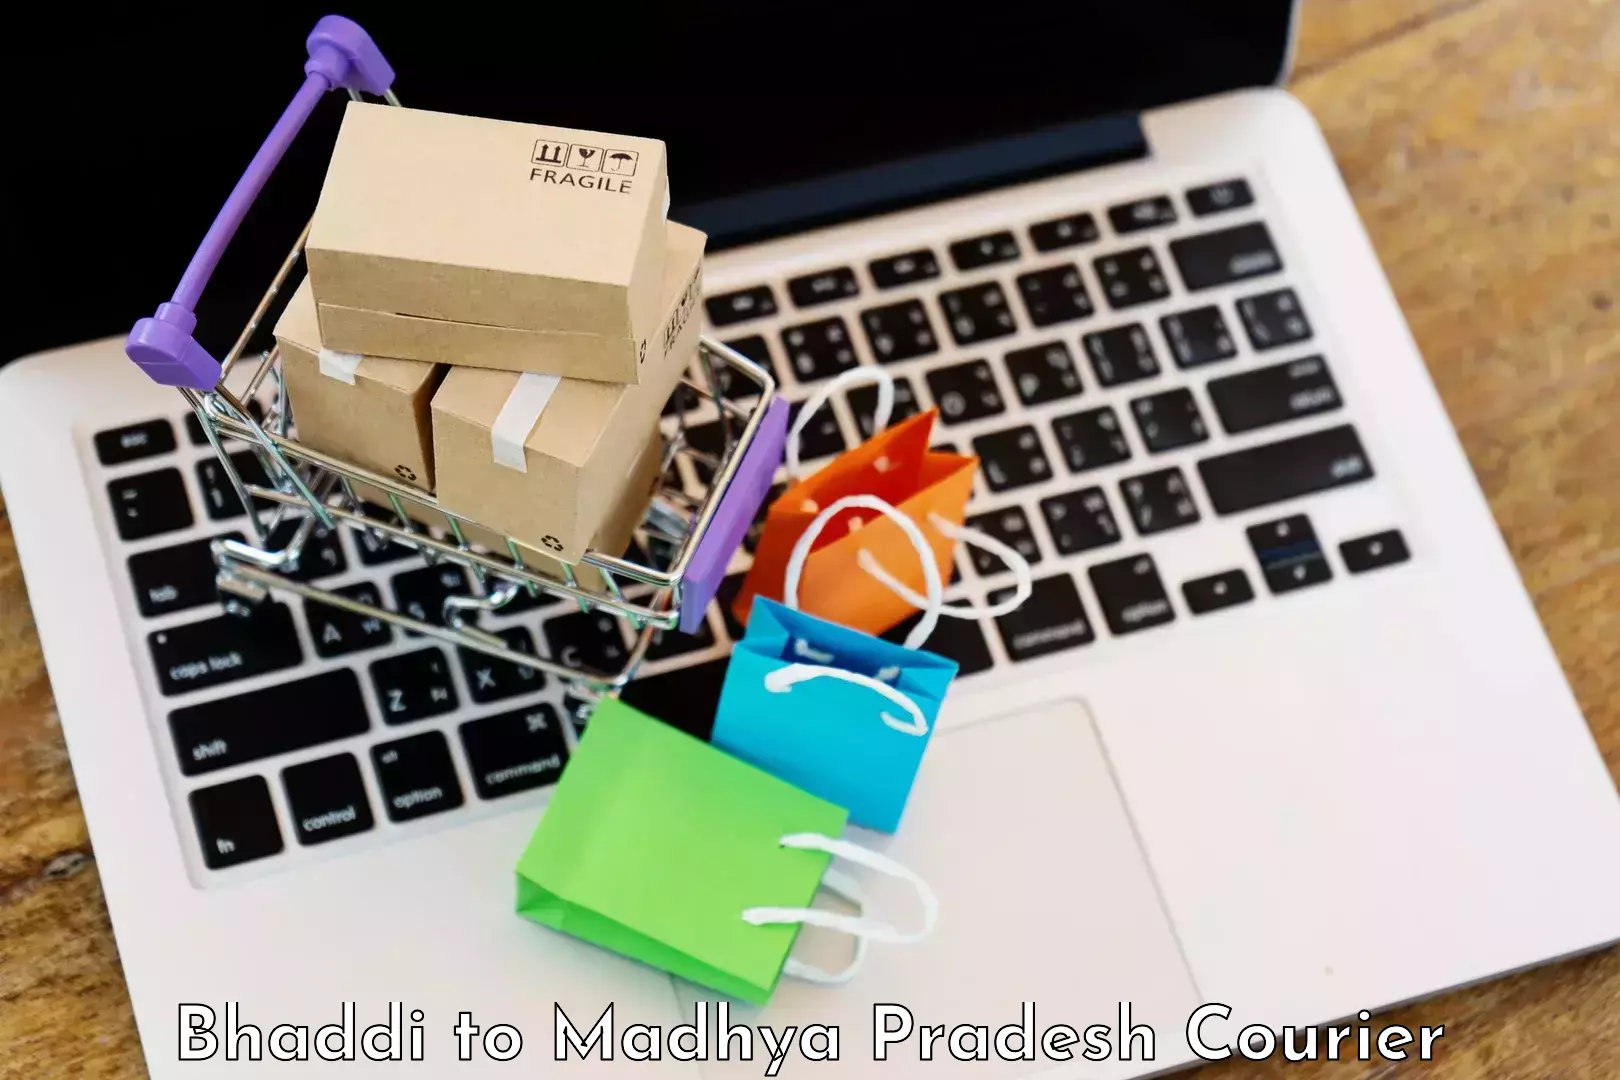 Personalized moving service Bhaddi to IIT Indore